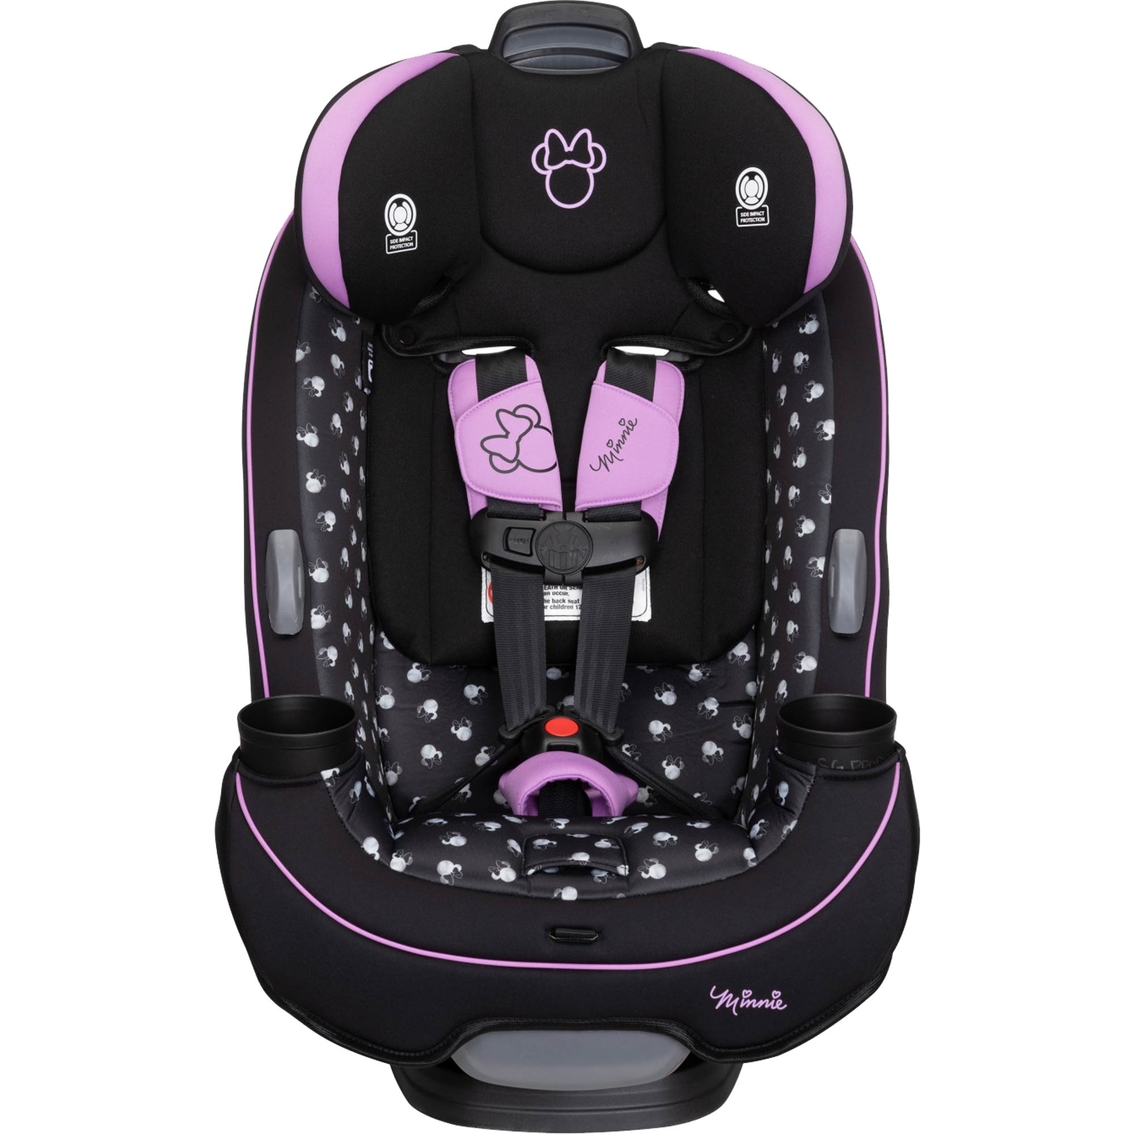 Disney Baby Grow and Go All in One Convertible Car Seat - Image 3 of 10